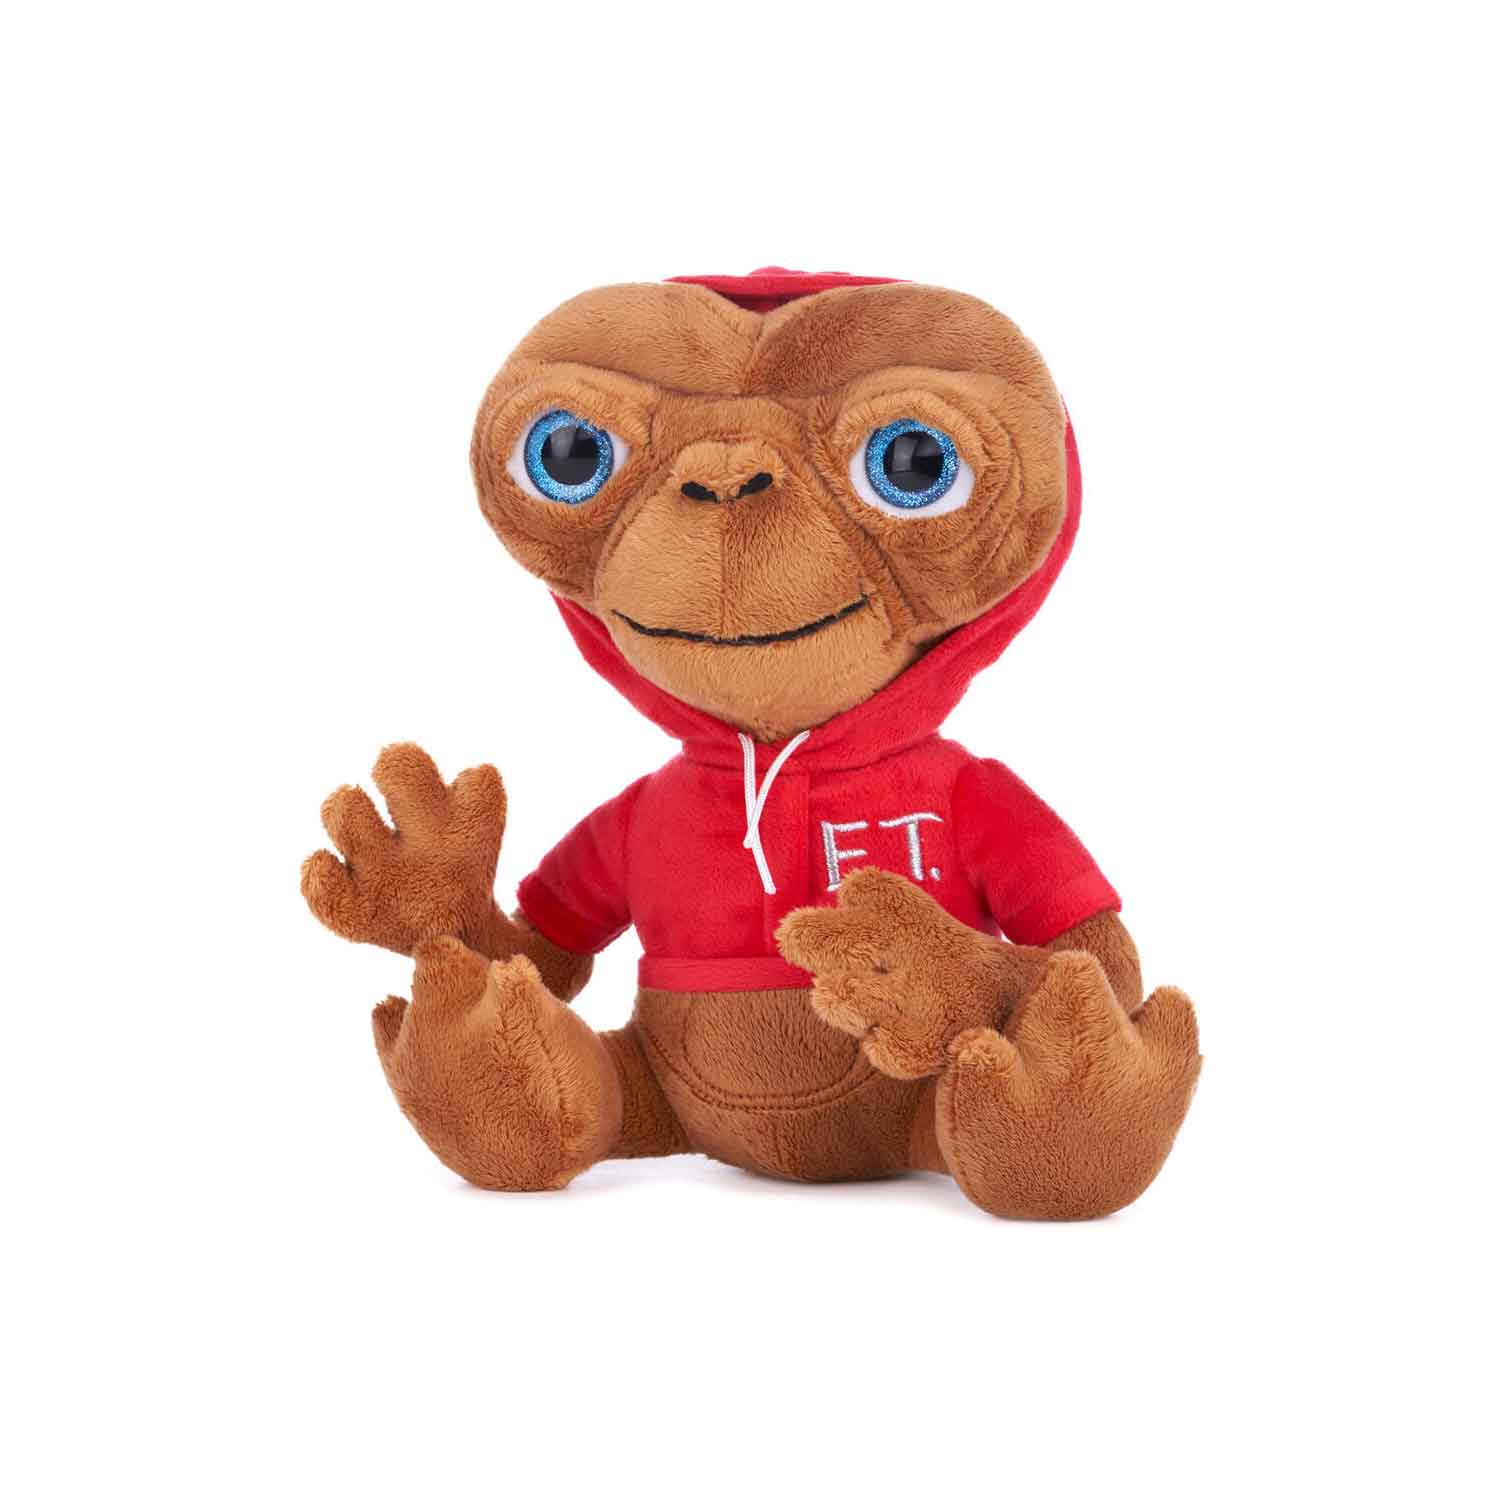 et-with-hoodie-plush